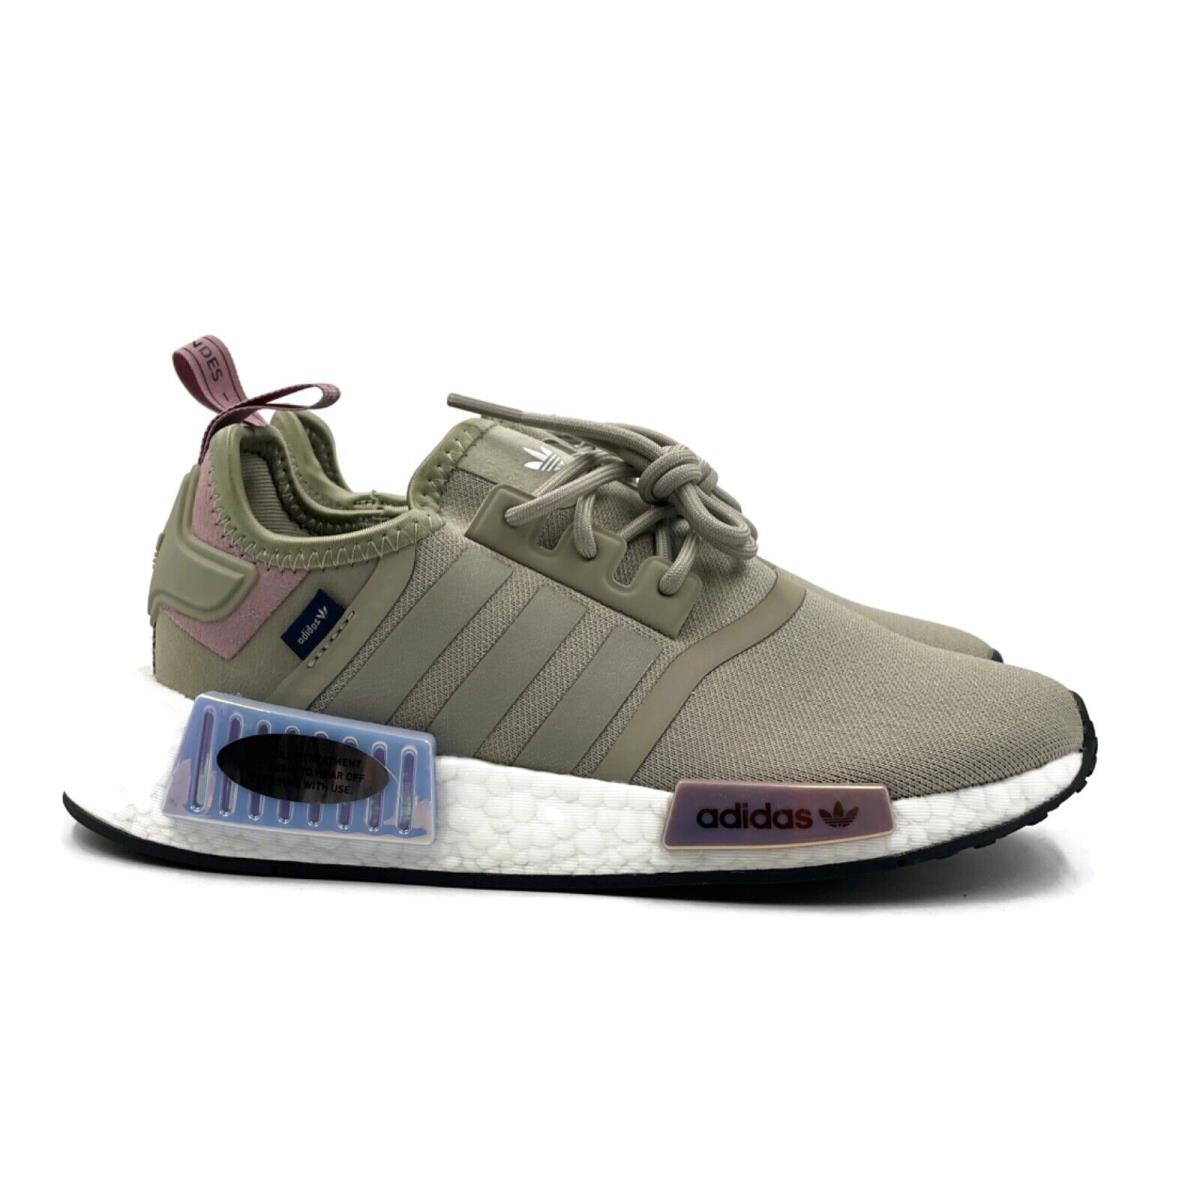 Adidas Nmd R1 Women Casual Running Shoe Gray Green Athletic Trainer Sneaker